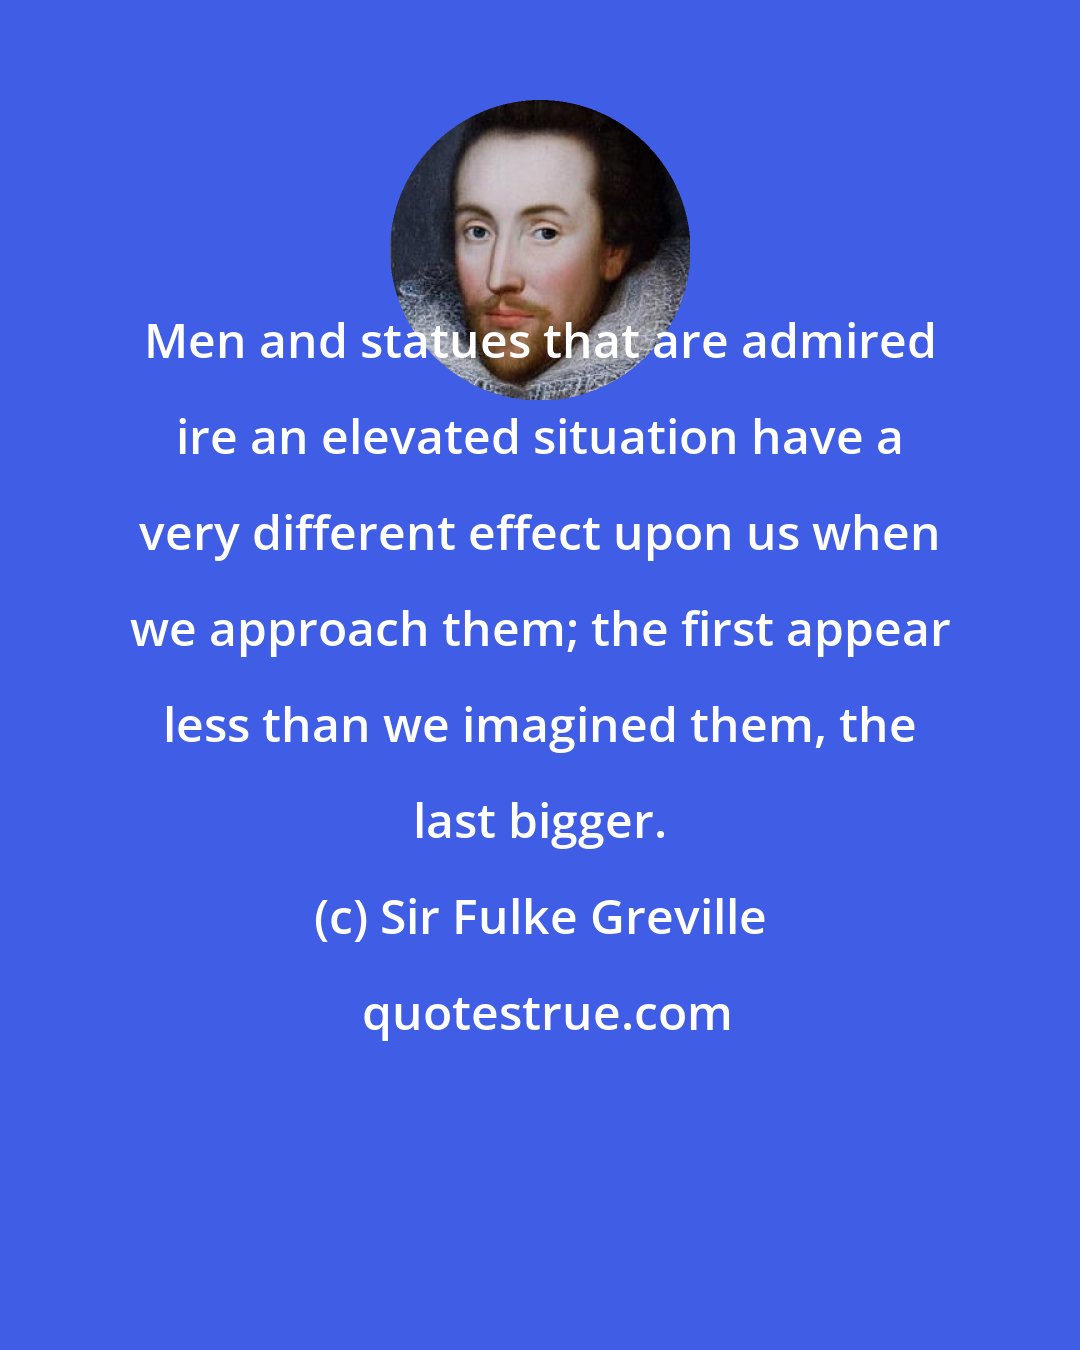 Sir Fulke Greville: Men and statues that are admired ire an elevated situation have a very different effect upon us when we approach them; the first appear less than we imagined them, the last bigger.